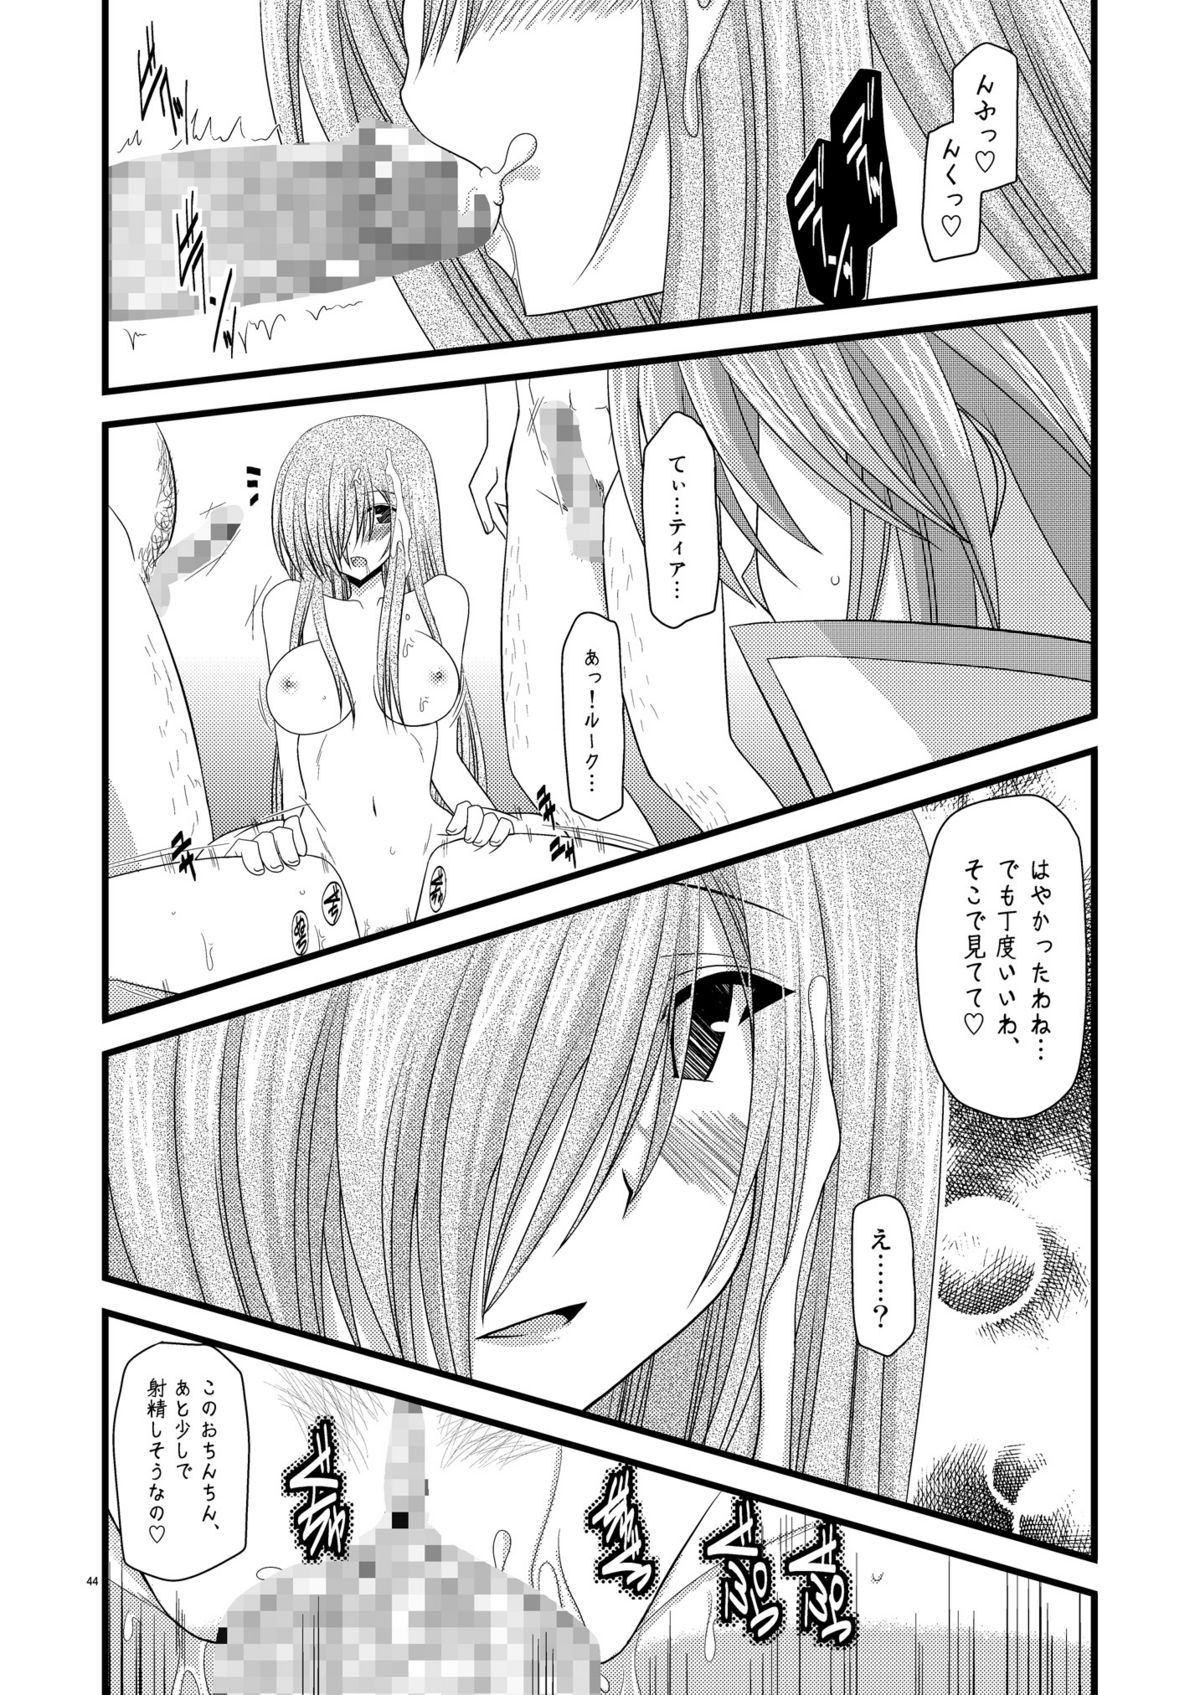 (SC41) [valssu] Melon Niku Bittake! V -the last- (Tales of the Abyss) page 44 full